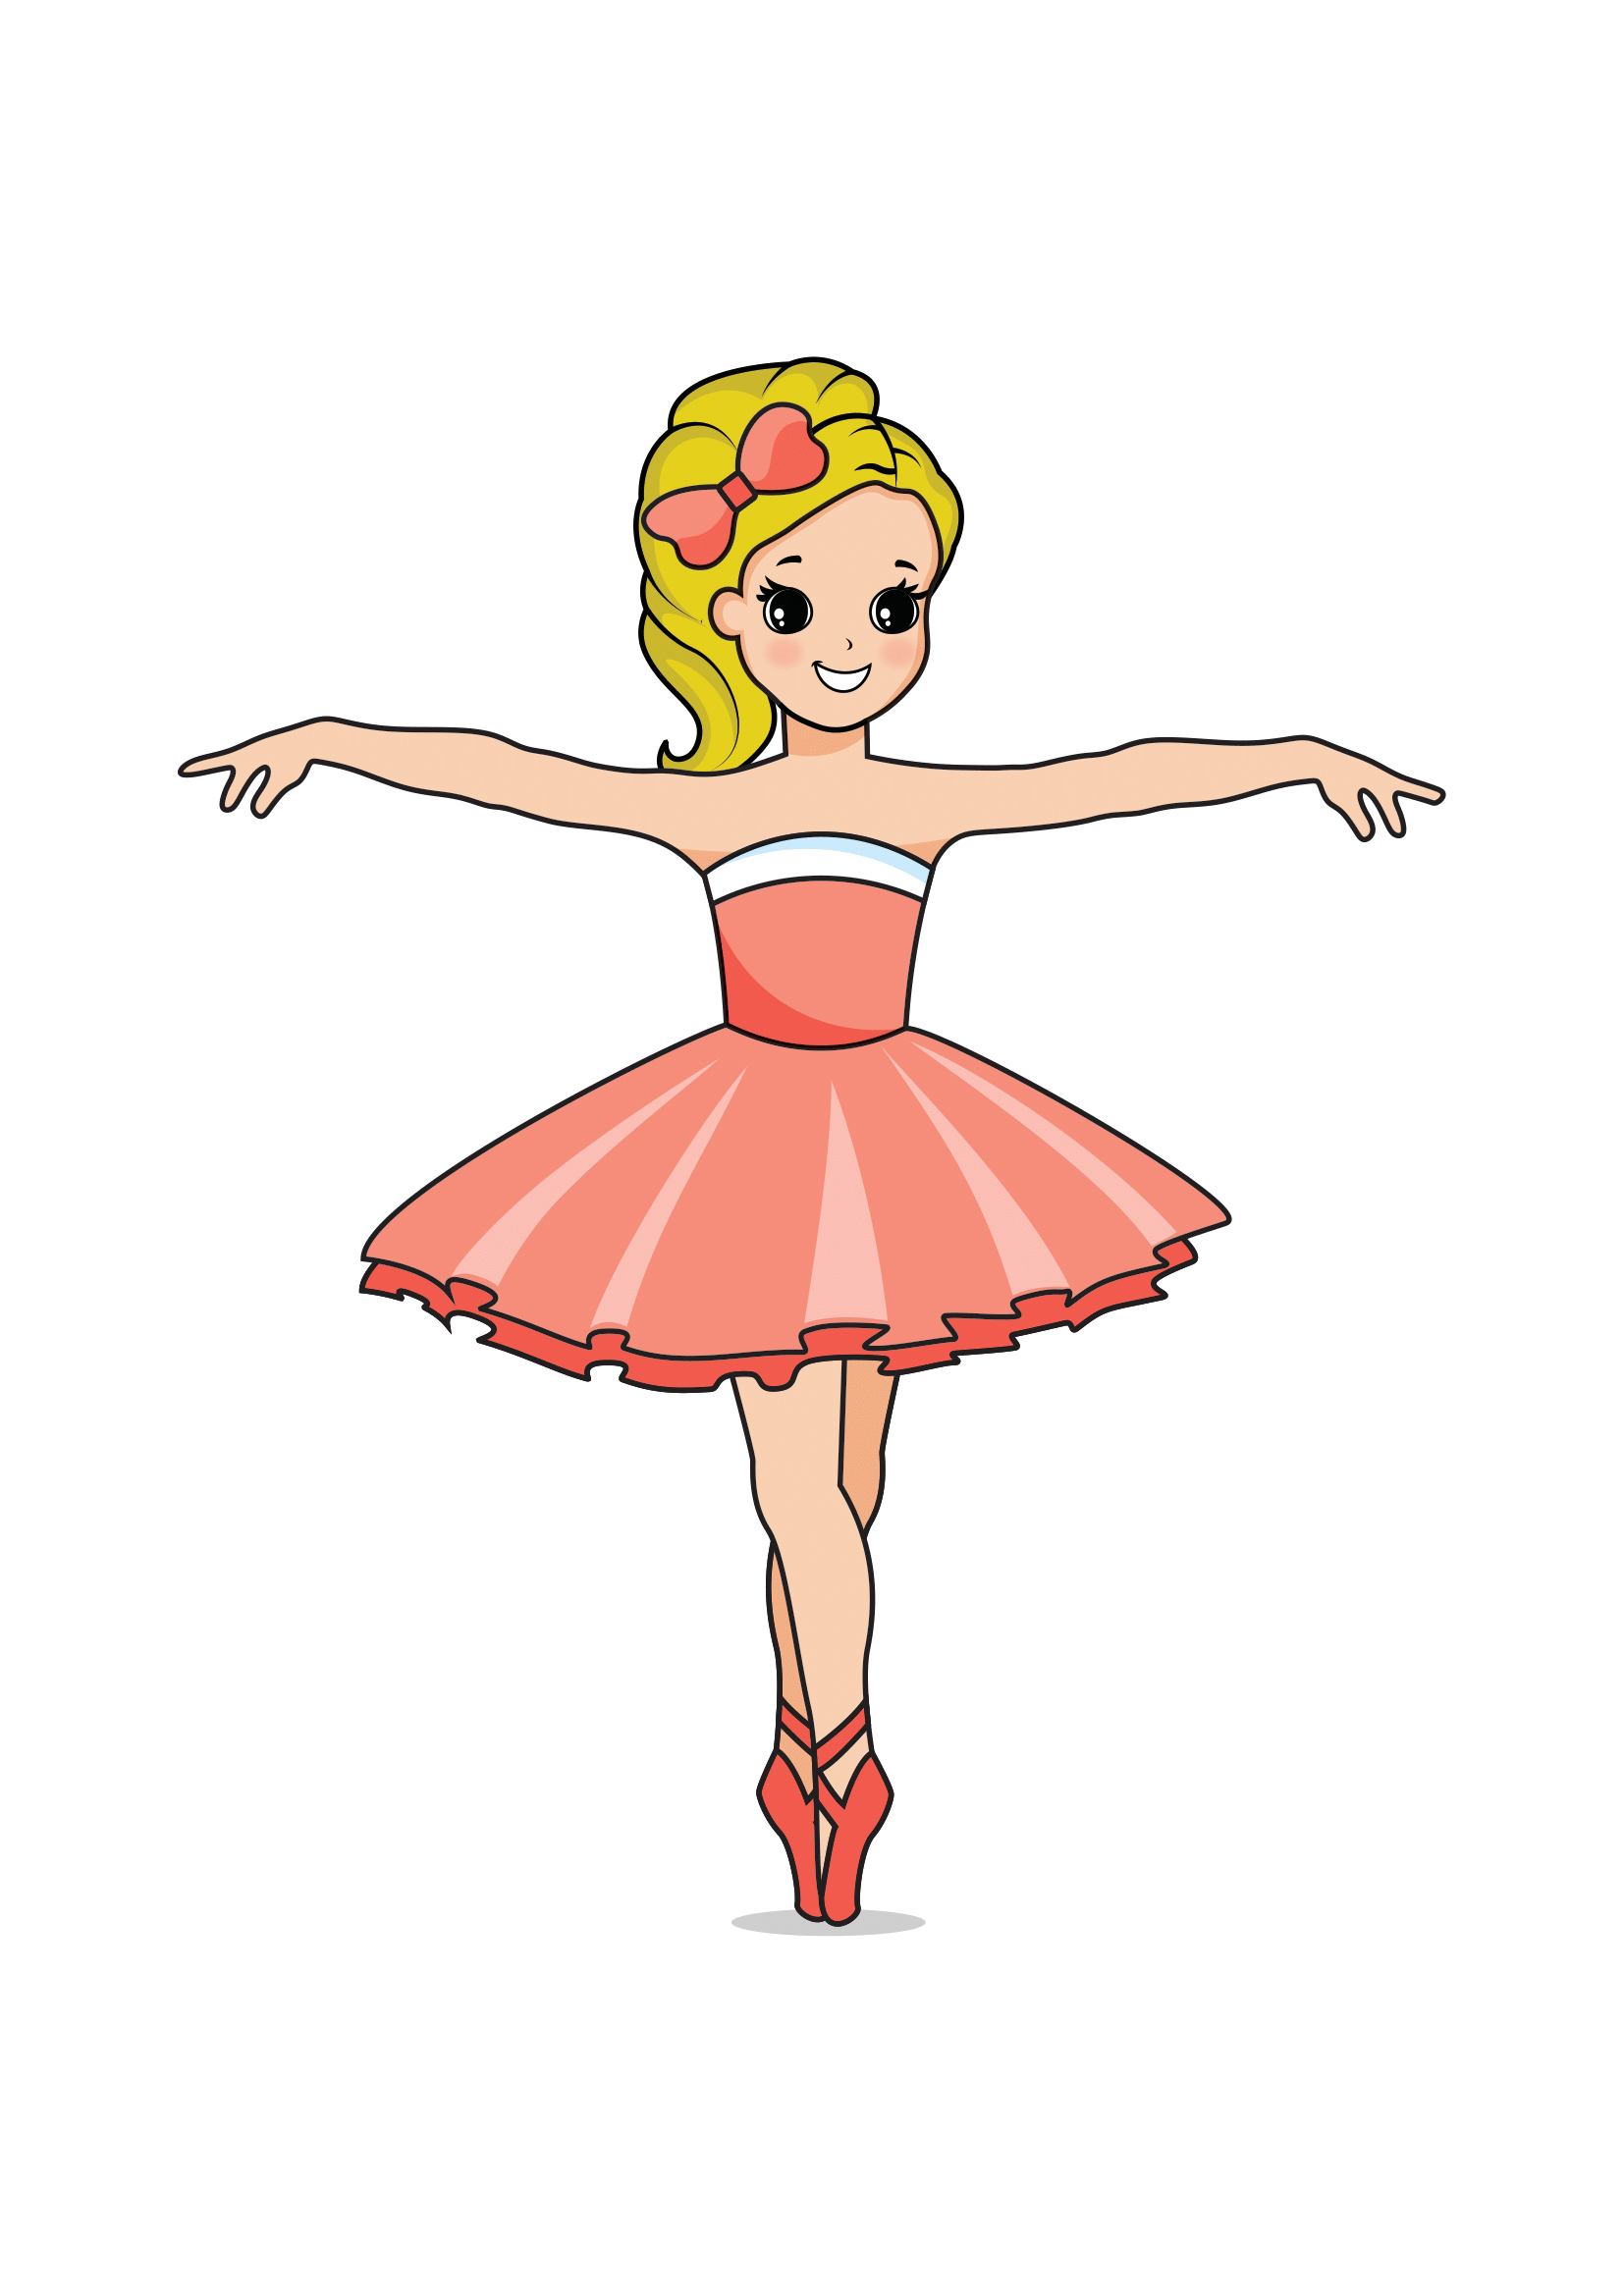 How To Draw A Ballerina Step By Step Printable